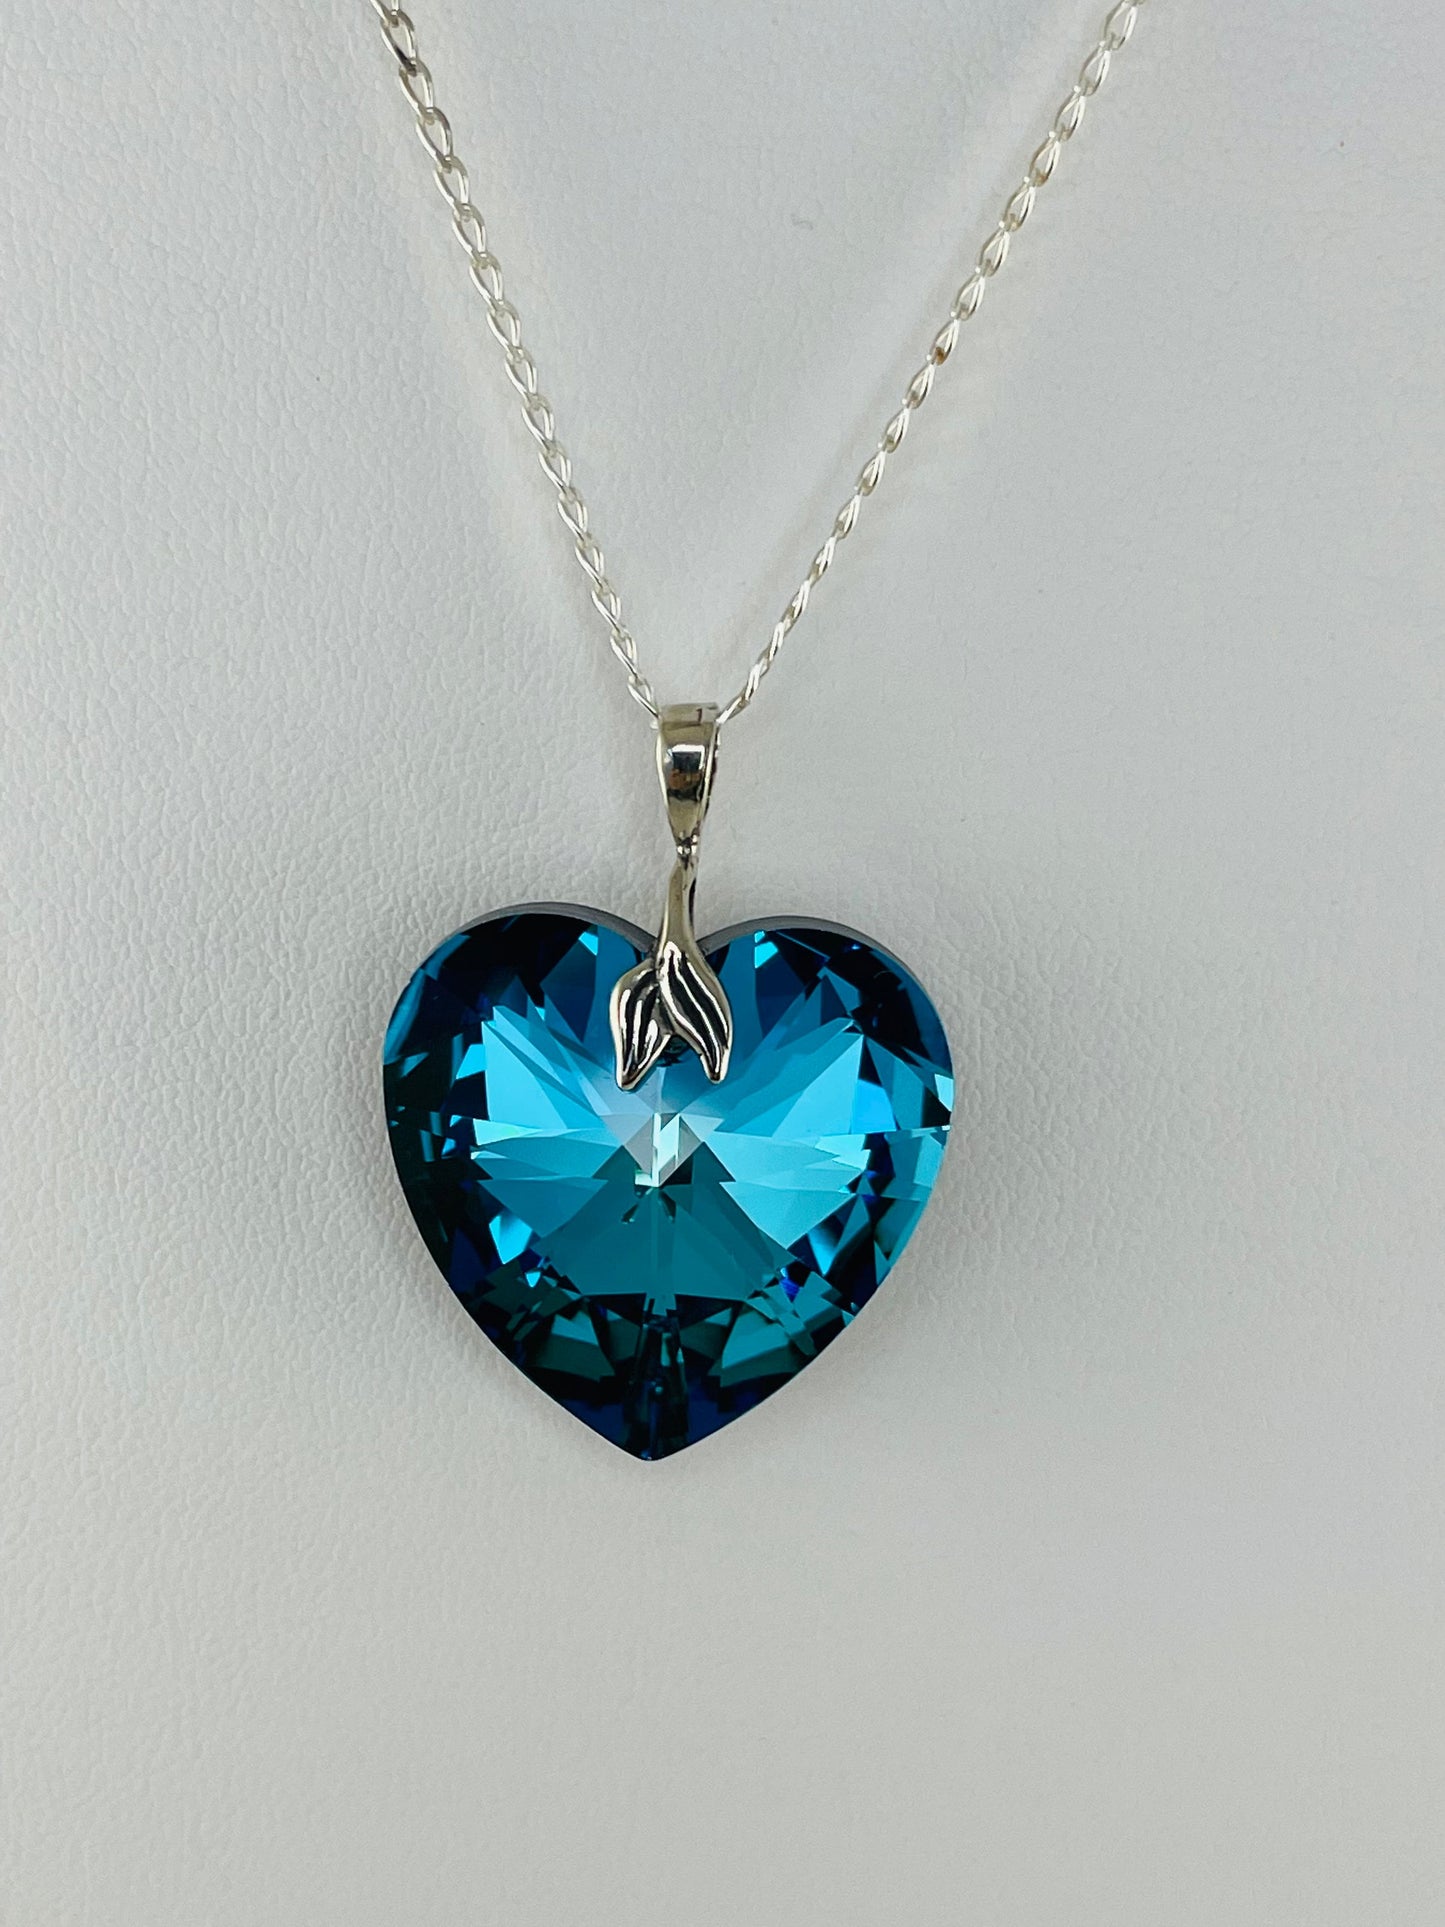 Large-PRESTIGE Crystal Bermuda Blue Heart Pendant Necklace,Gift for Valentine's Day Mother's Day,Blue Heart Necklace,Heart Crystal Necklace